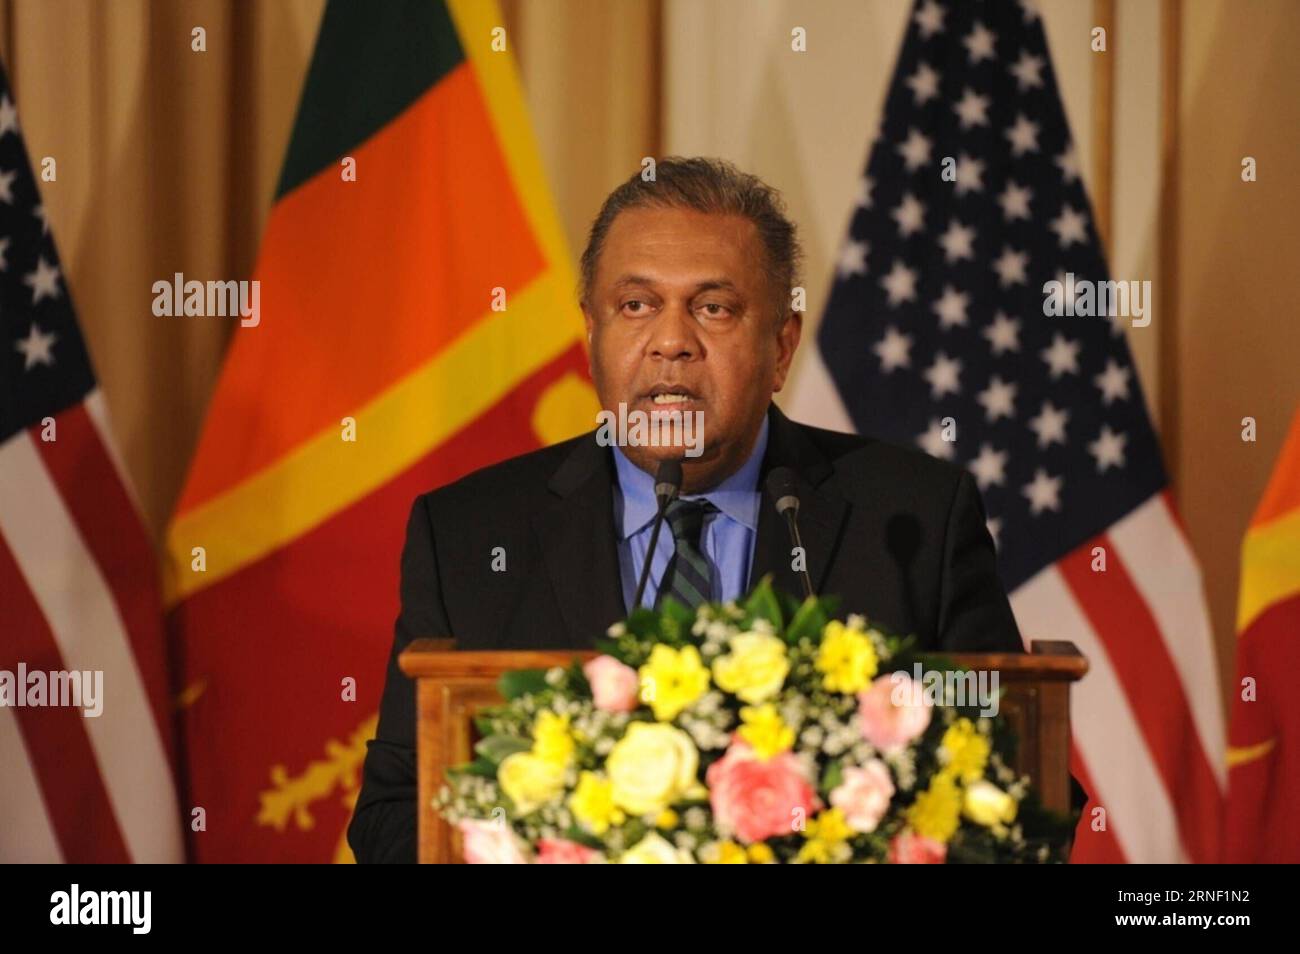 COLOMBO, July 12, 2016 -- Sri Lankan Foreign Minister Mangala Samaraweera speaks during a press conference after a meeting with U.S. delegates in Colombo, Sri Lanka, July 12, 2016. The U.S. said on Tuesday it is committed to the partnership with Sri Lanka as the country moves ahead with its post-civil war reconciliation process. ) SRI LANKA-COLOMBO-U.S.-RECONCILIATION-SUPPORT GayanxSameera PUBLICATIONxNOTxINxCHN   Colombo July 12 2016 Sri Lankan Foreign Ministers Mangala Samaraweera Speaks during a Press Conference After a Meeting With U S Delegates in Colombo Sri Lanka July 12 2016 The U S Sa Stock Photo